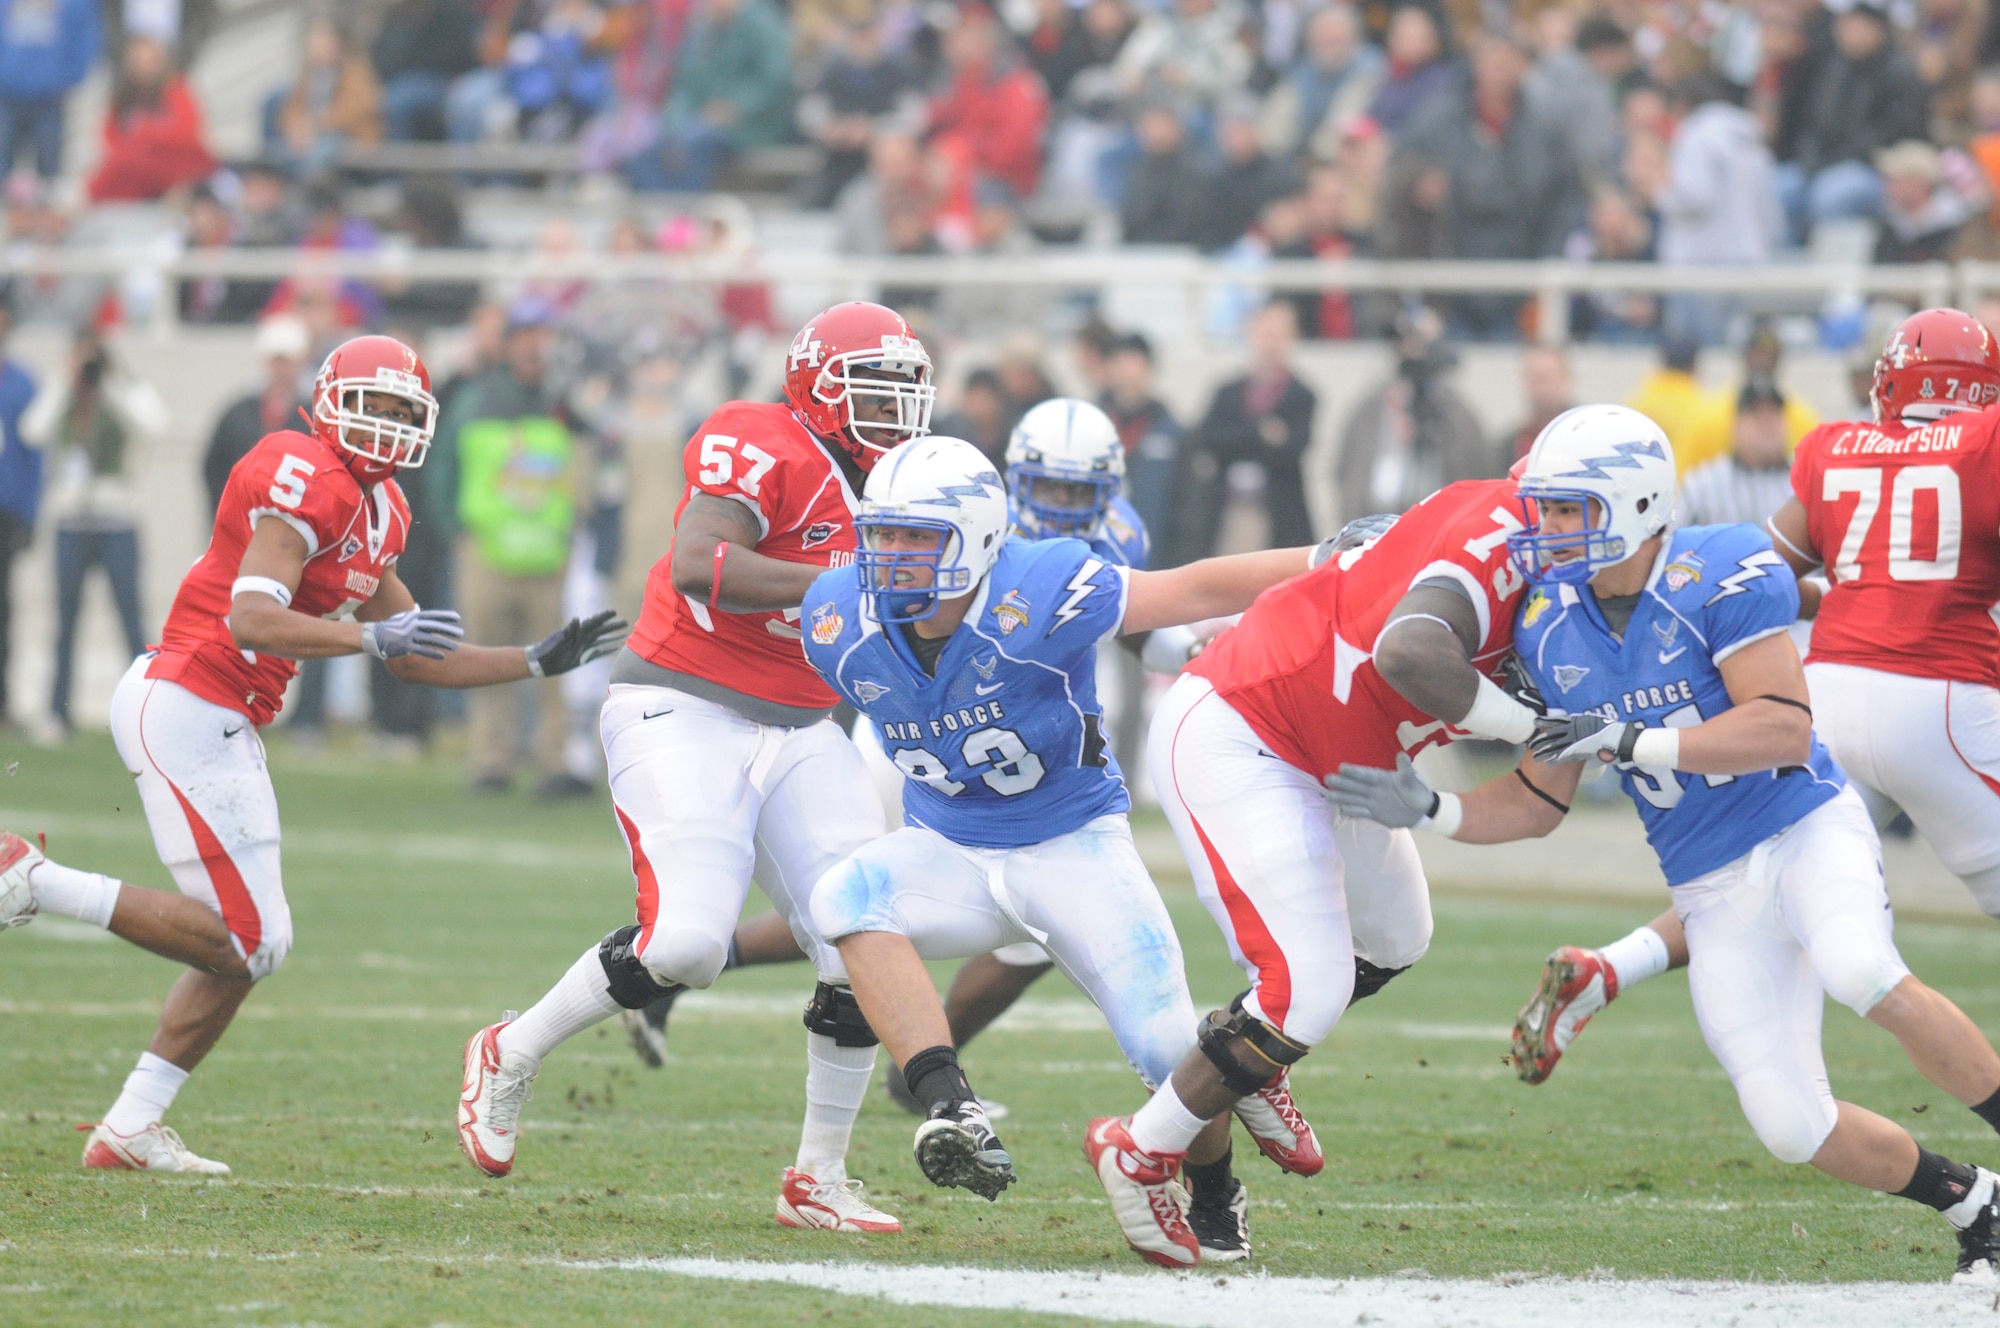 Air Force Falcons defensive lineman Ben Garland, left in blue uniform, and defensive end Myles Morales slip past members of the University of Houston Cougars during the Armed Forces Bowl Dec. 31, 2009, in Fort Worth, Texas. The Air Force Academy won the game 47-20. (U.S. Air Force photo/Bill Evans)